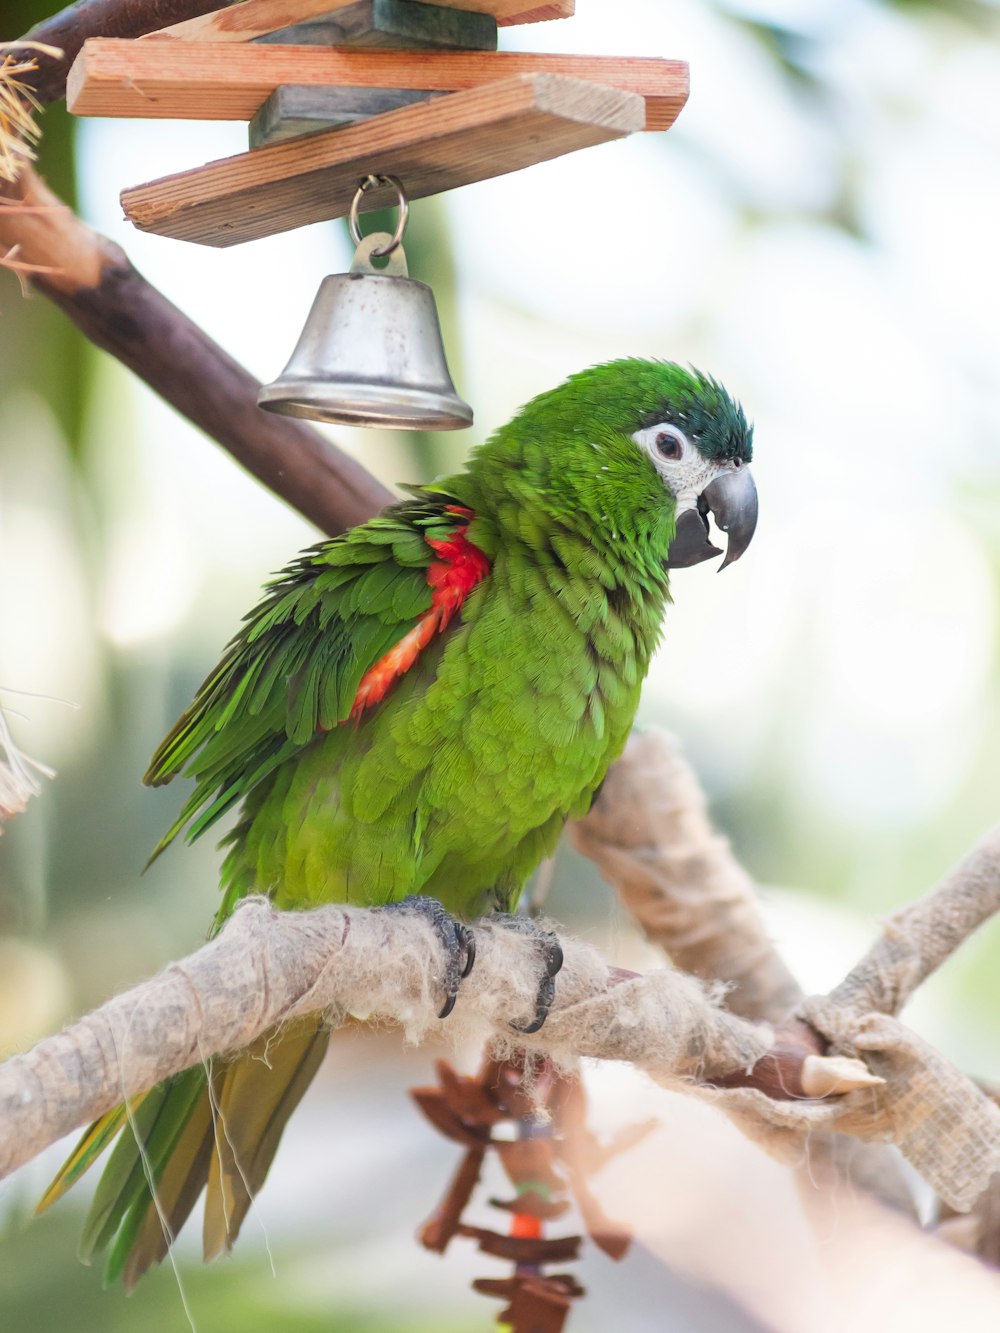 a green parrot perched on a tree branch next to a bird feeder